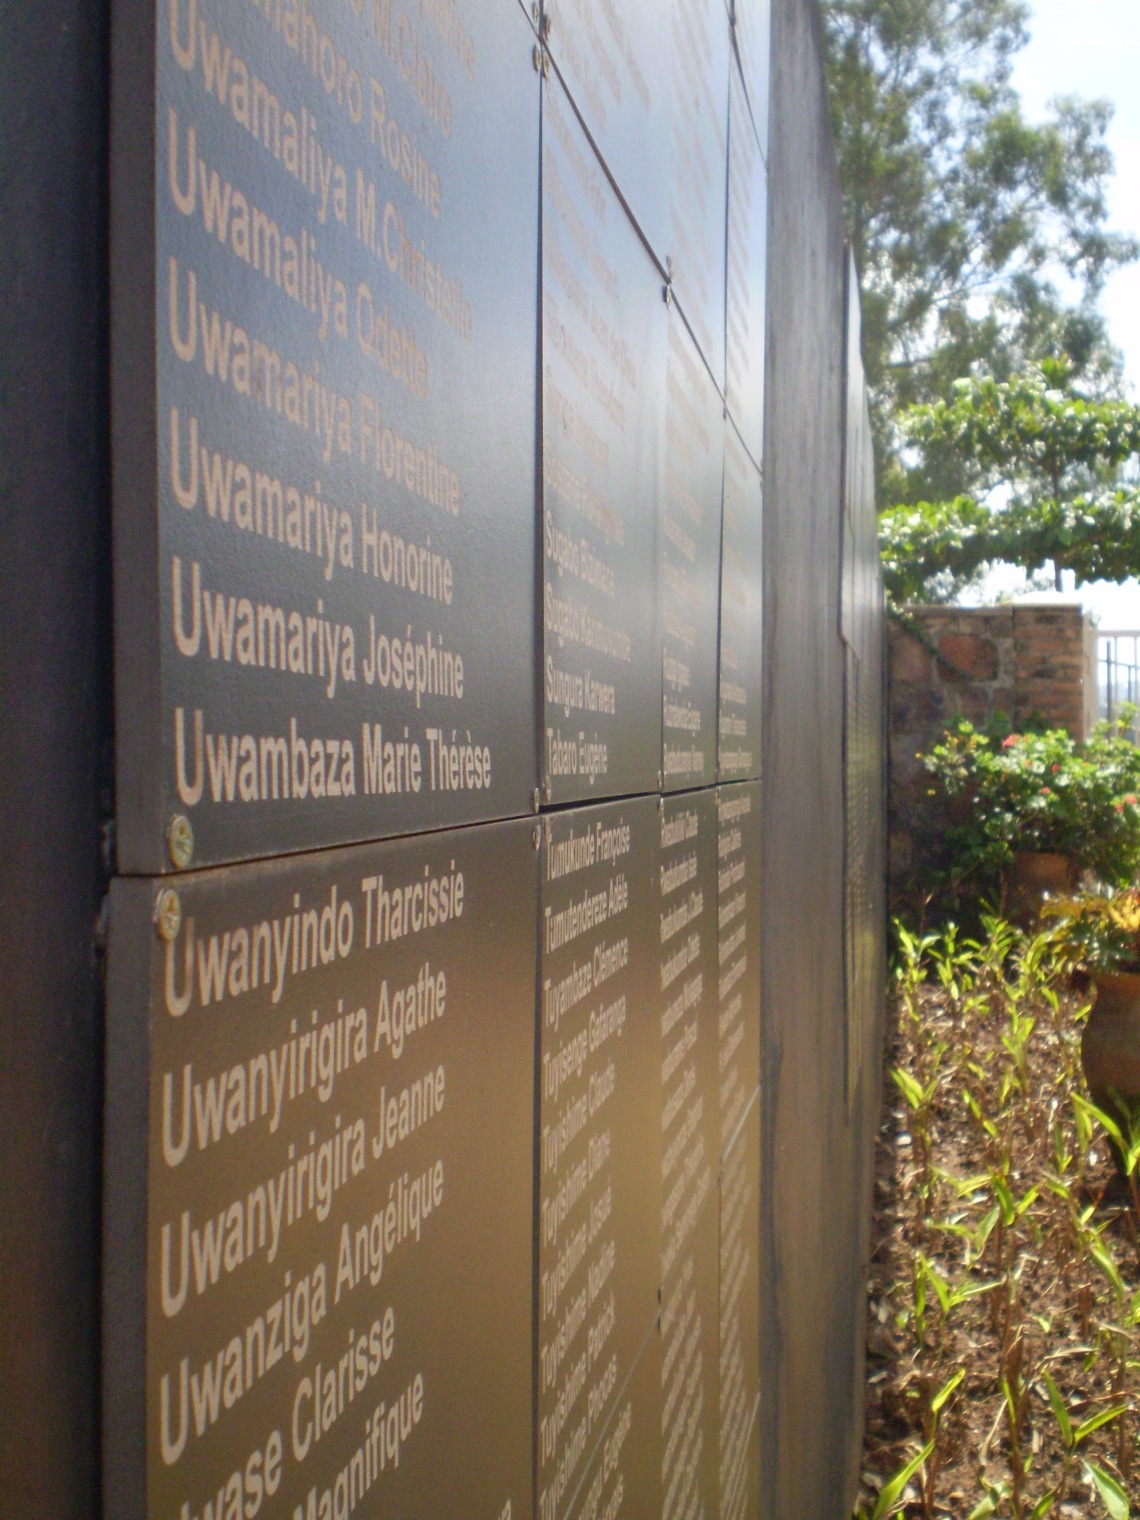 The Wall of Names, Kigali, Genocide Memorial